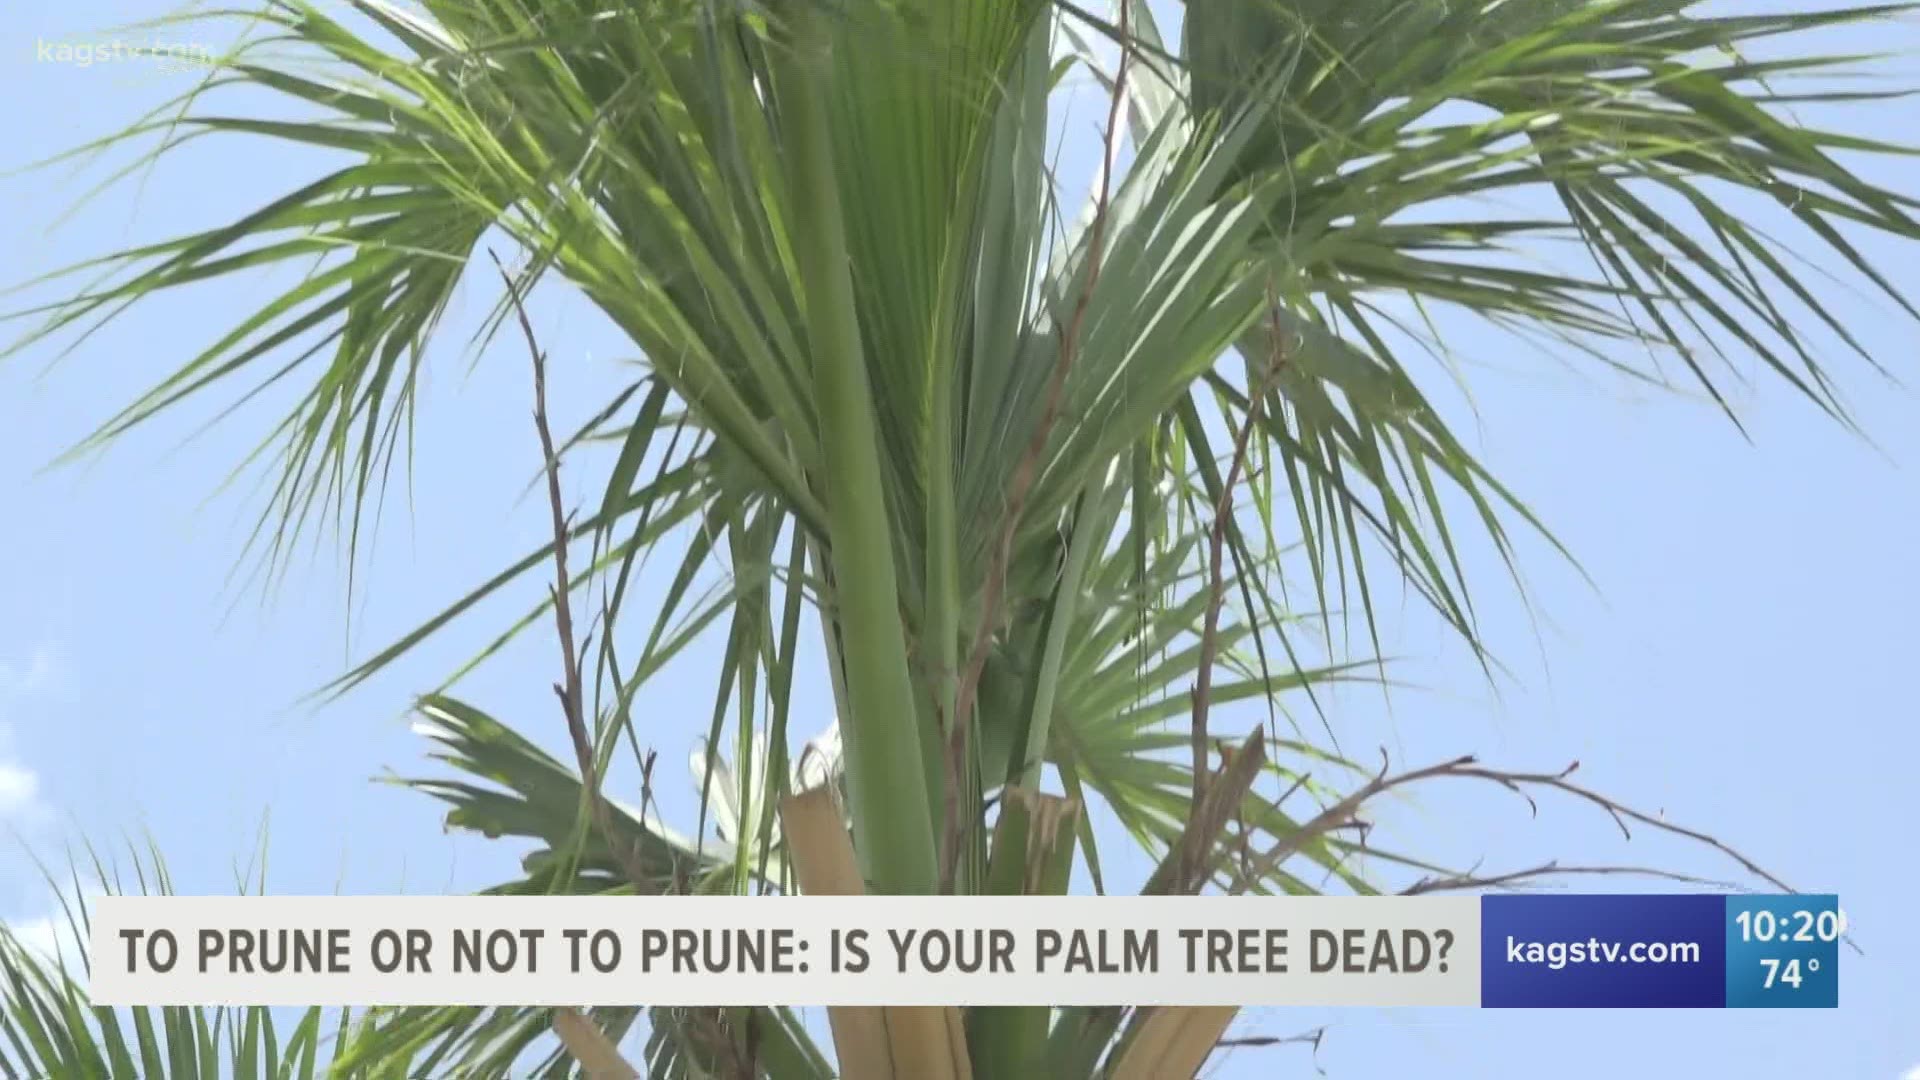 The Gardens at Texas A&M have been getting a lot of questions as to whether palm trees in our area are dead or alive after February’s winter storm.